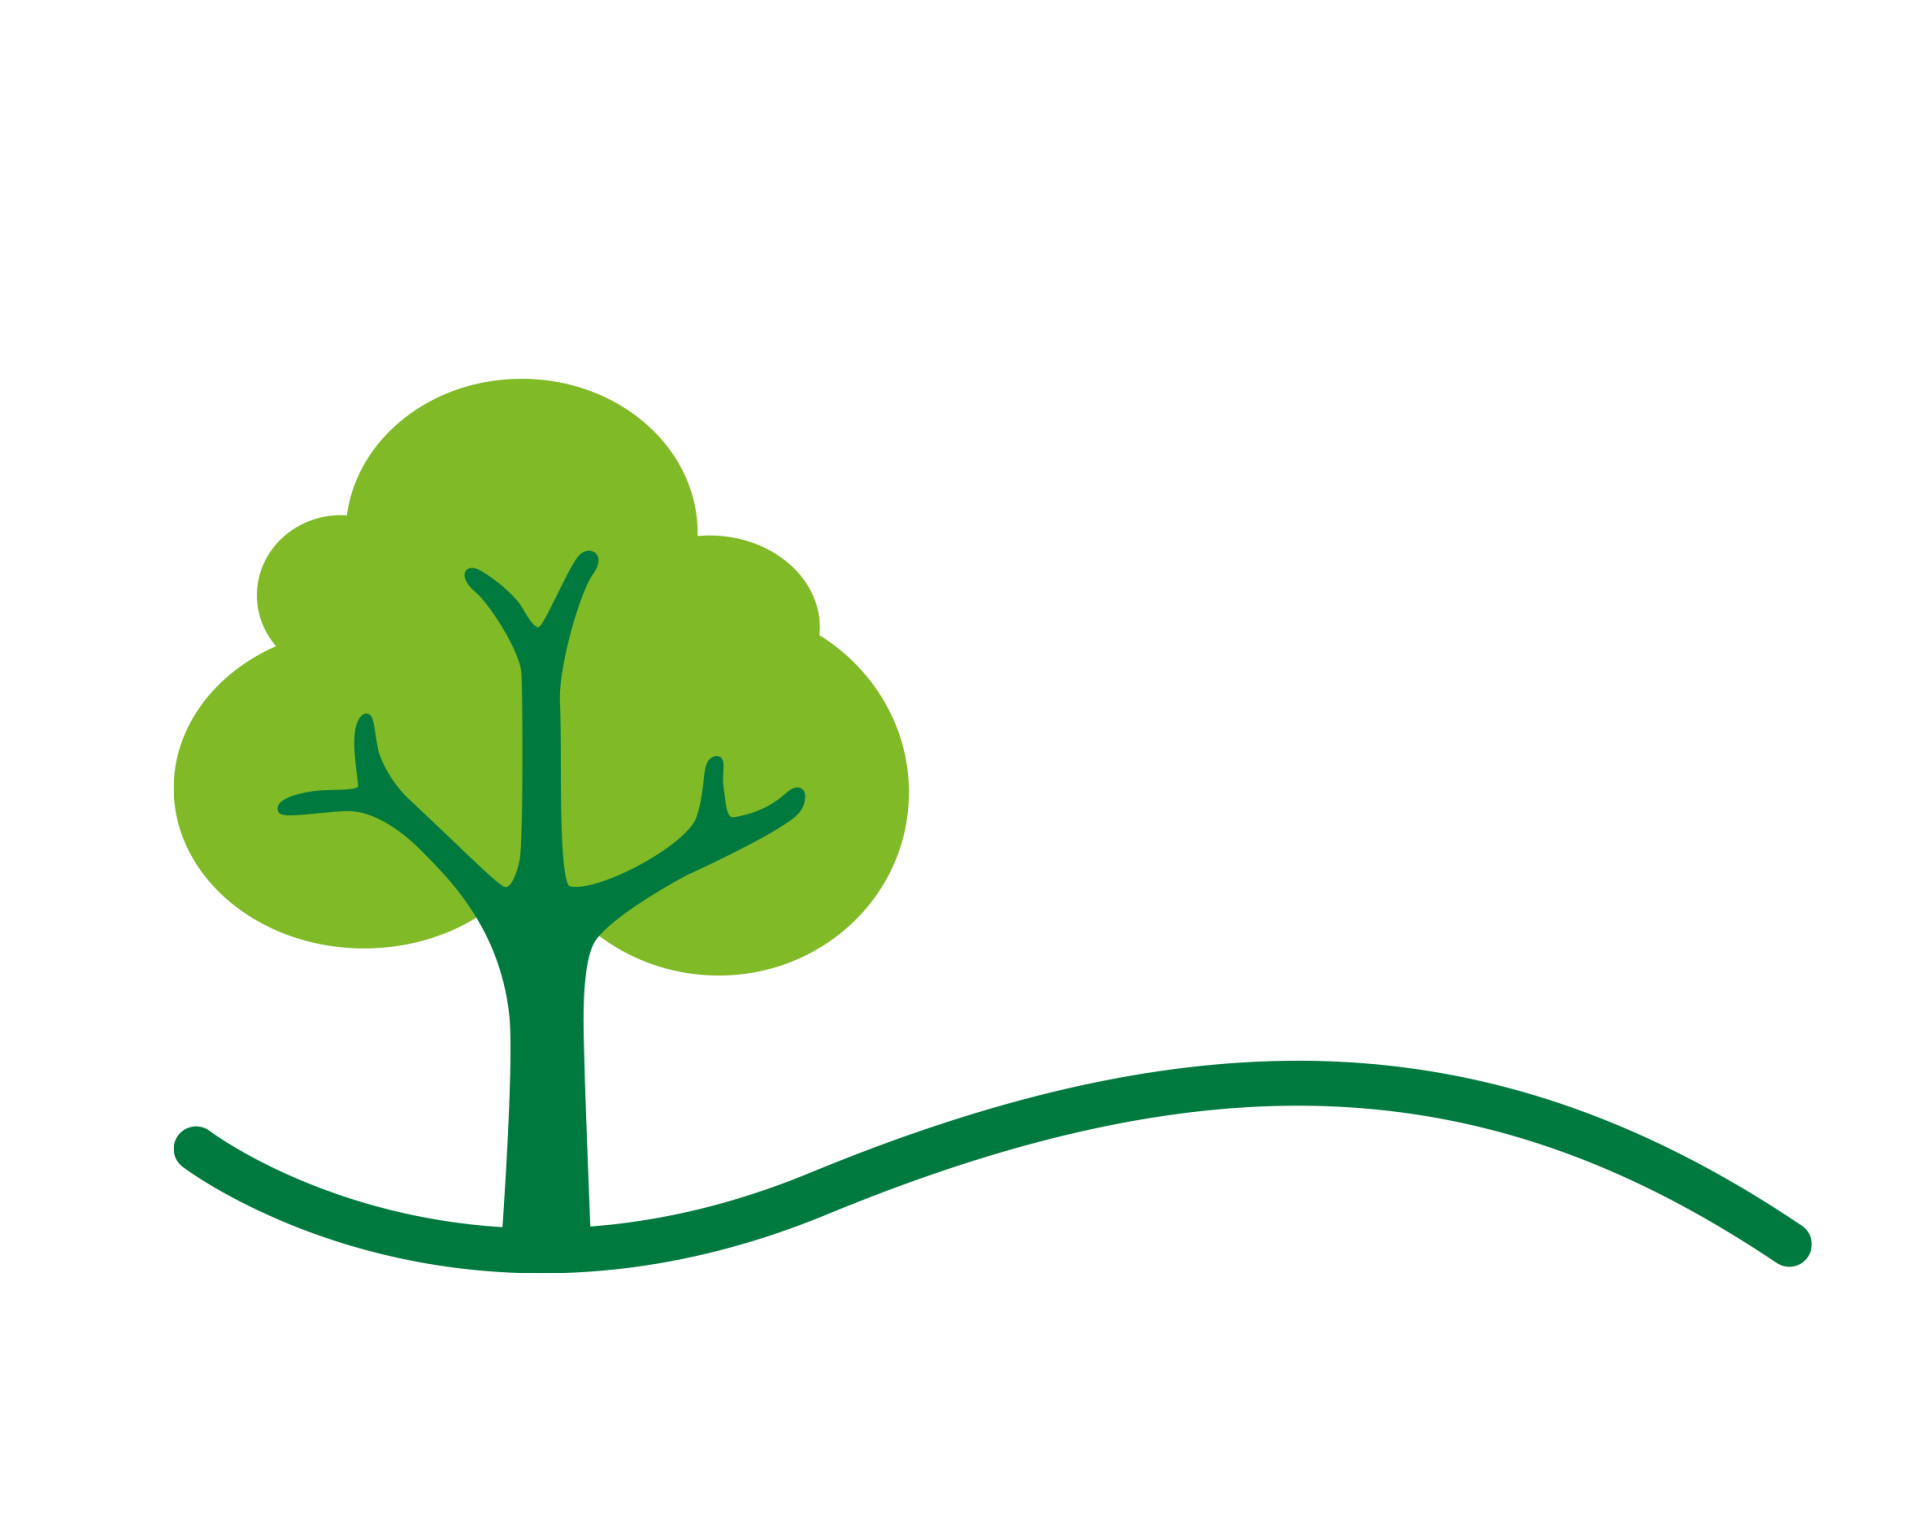 A tree icon from the logo for outdoor education centre Nell Bank